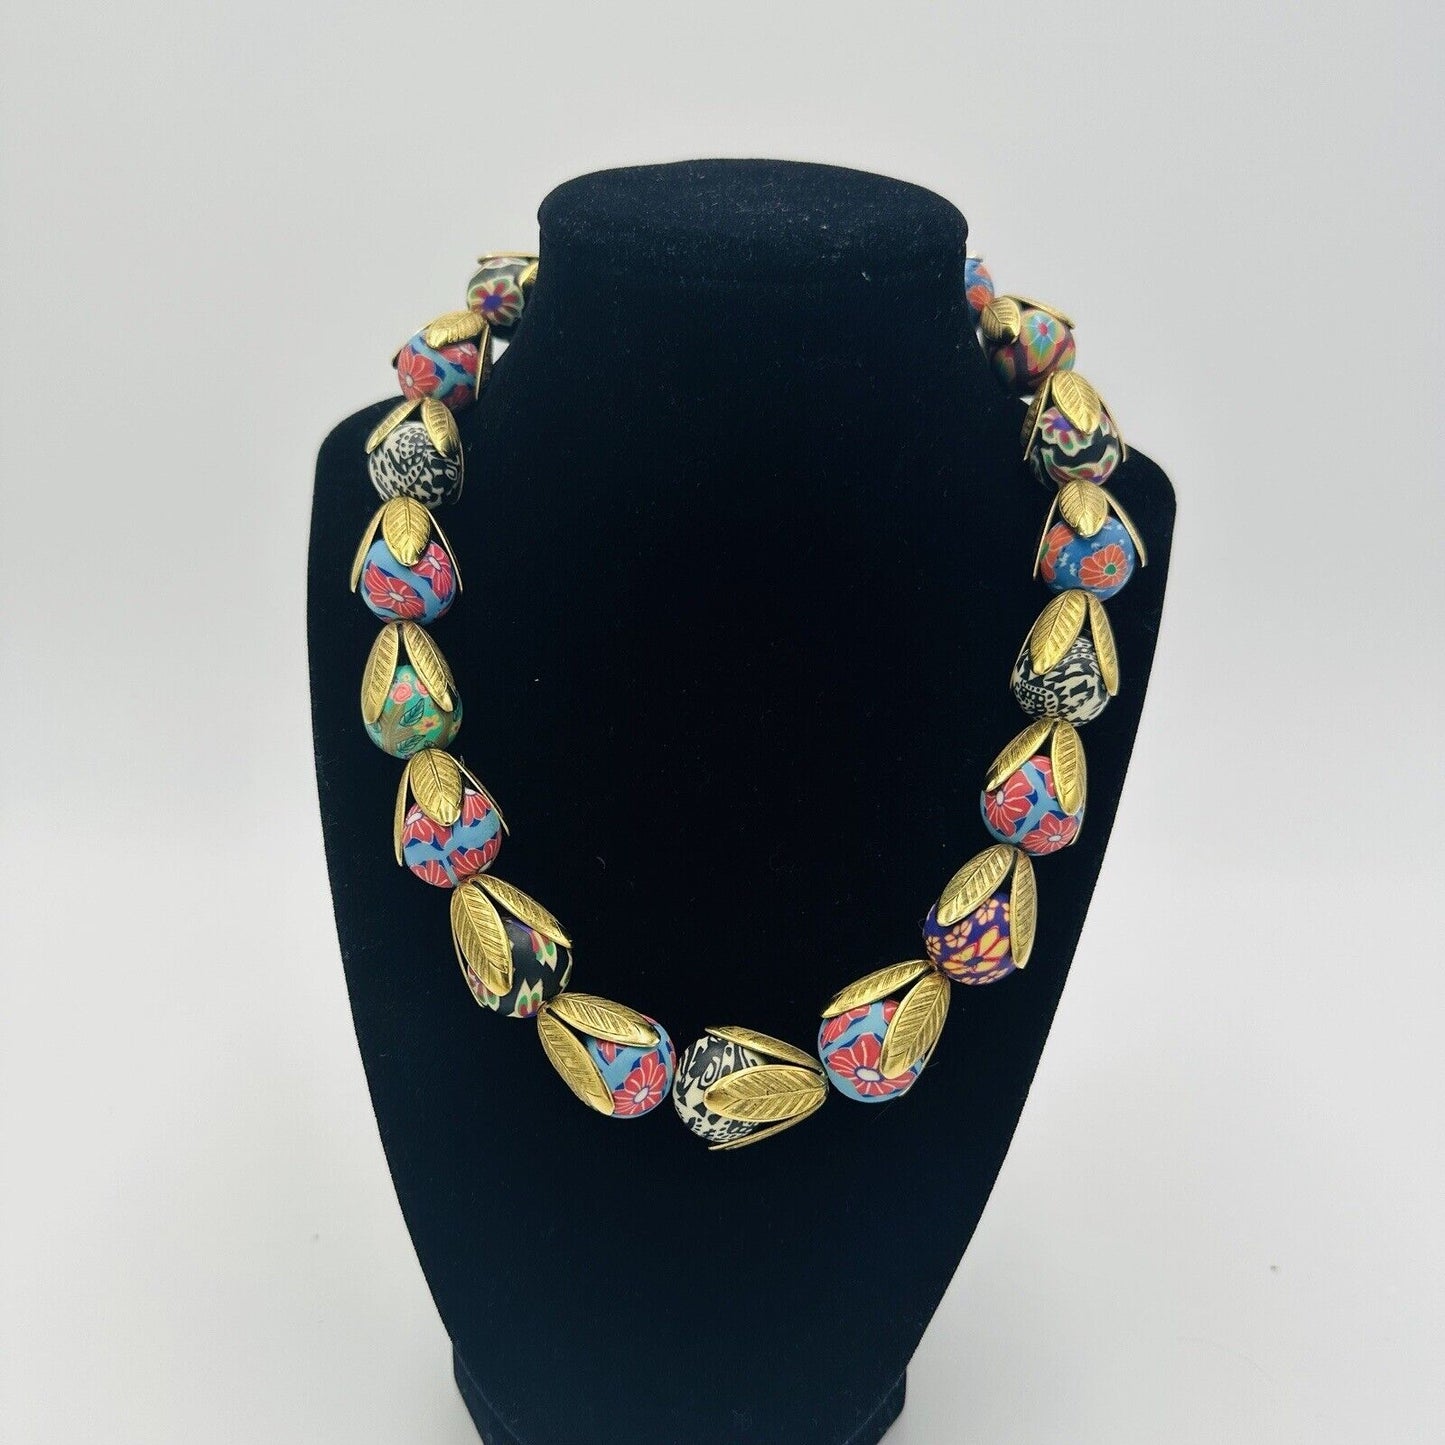 Lenora Dame Gold Tone Floral Tulips Abstract  Multicolor Beaded Necklace 18”